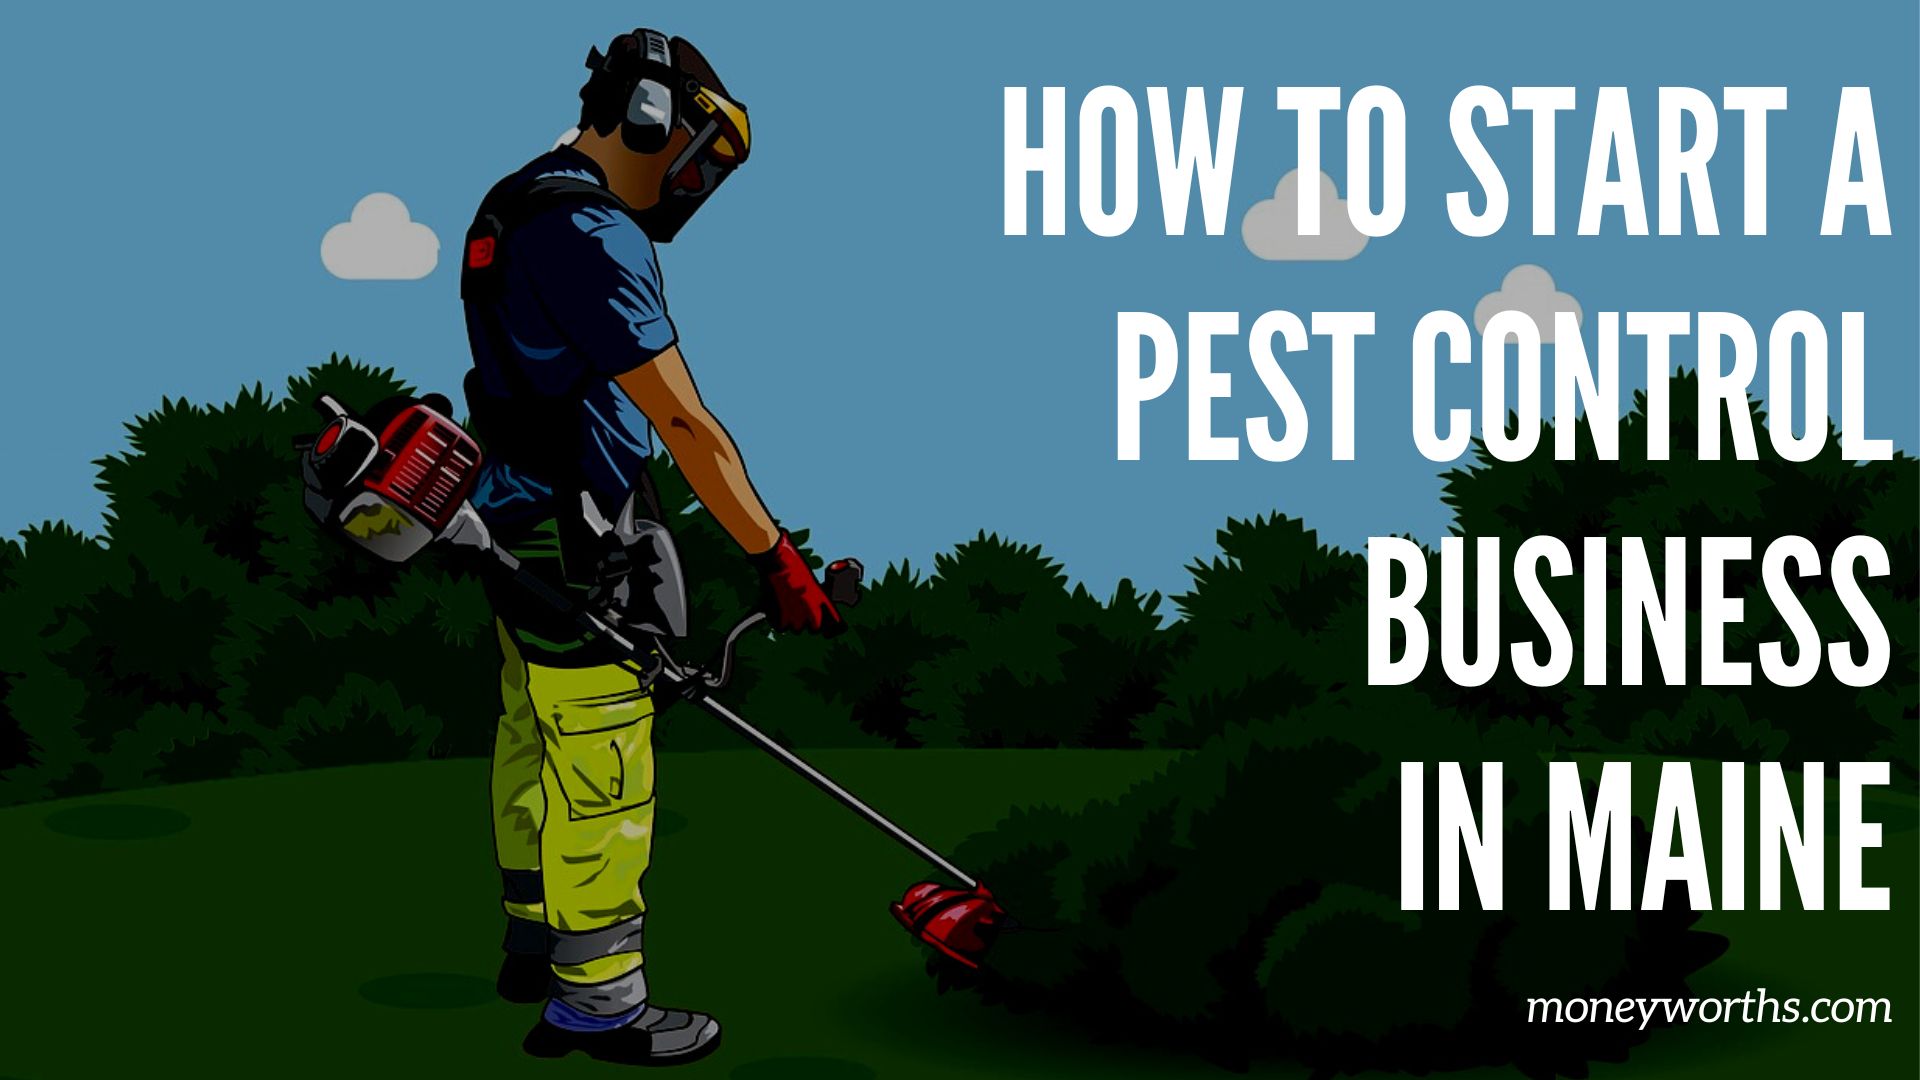 How to start a pest control business in Maine?